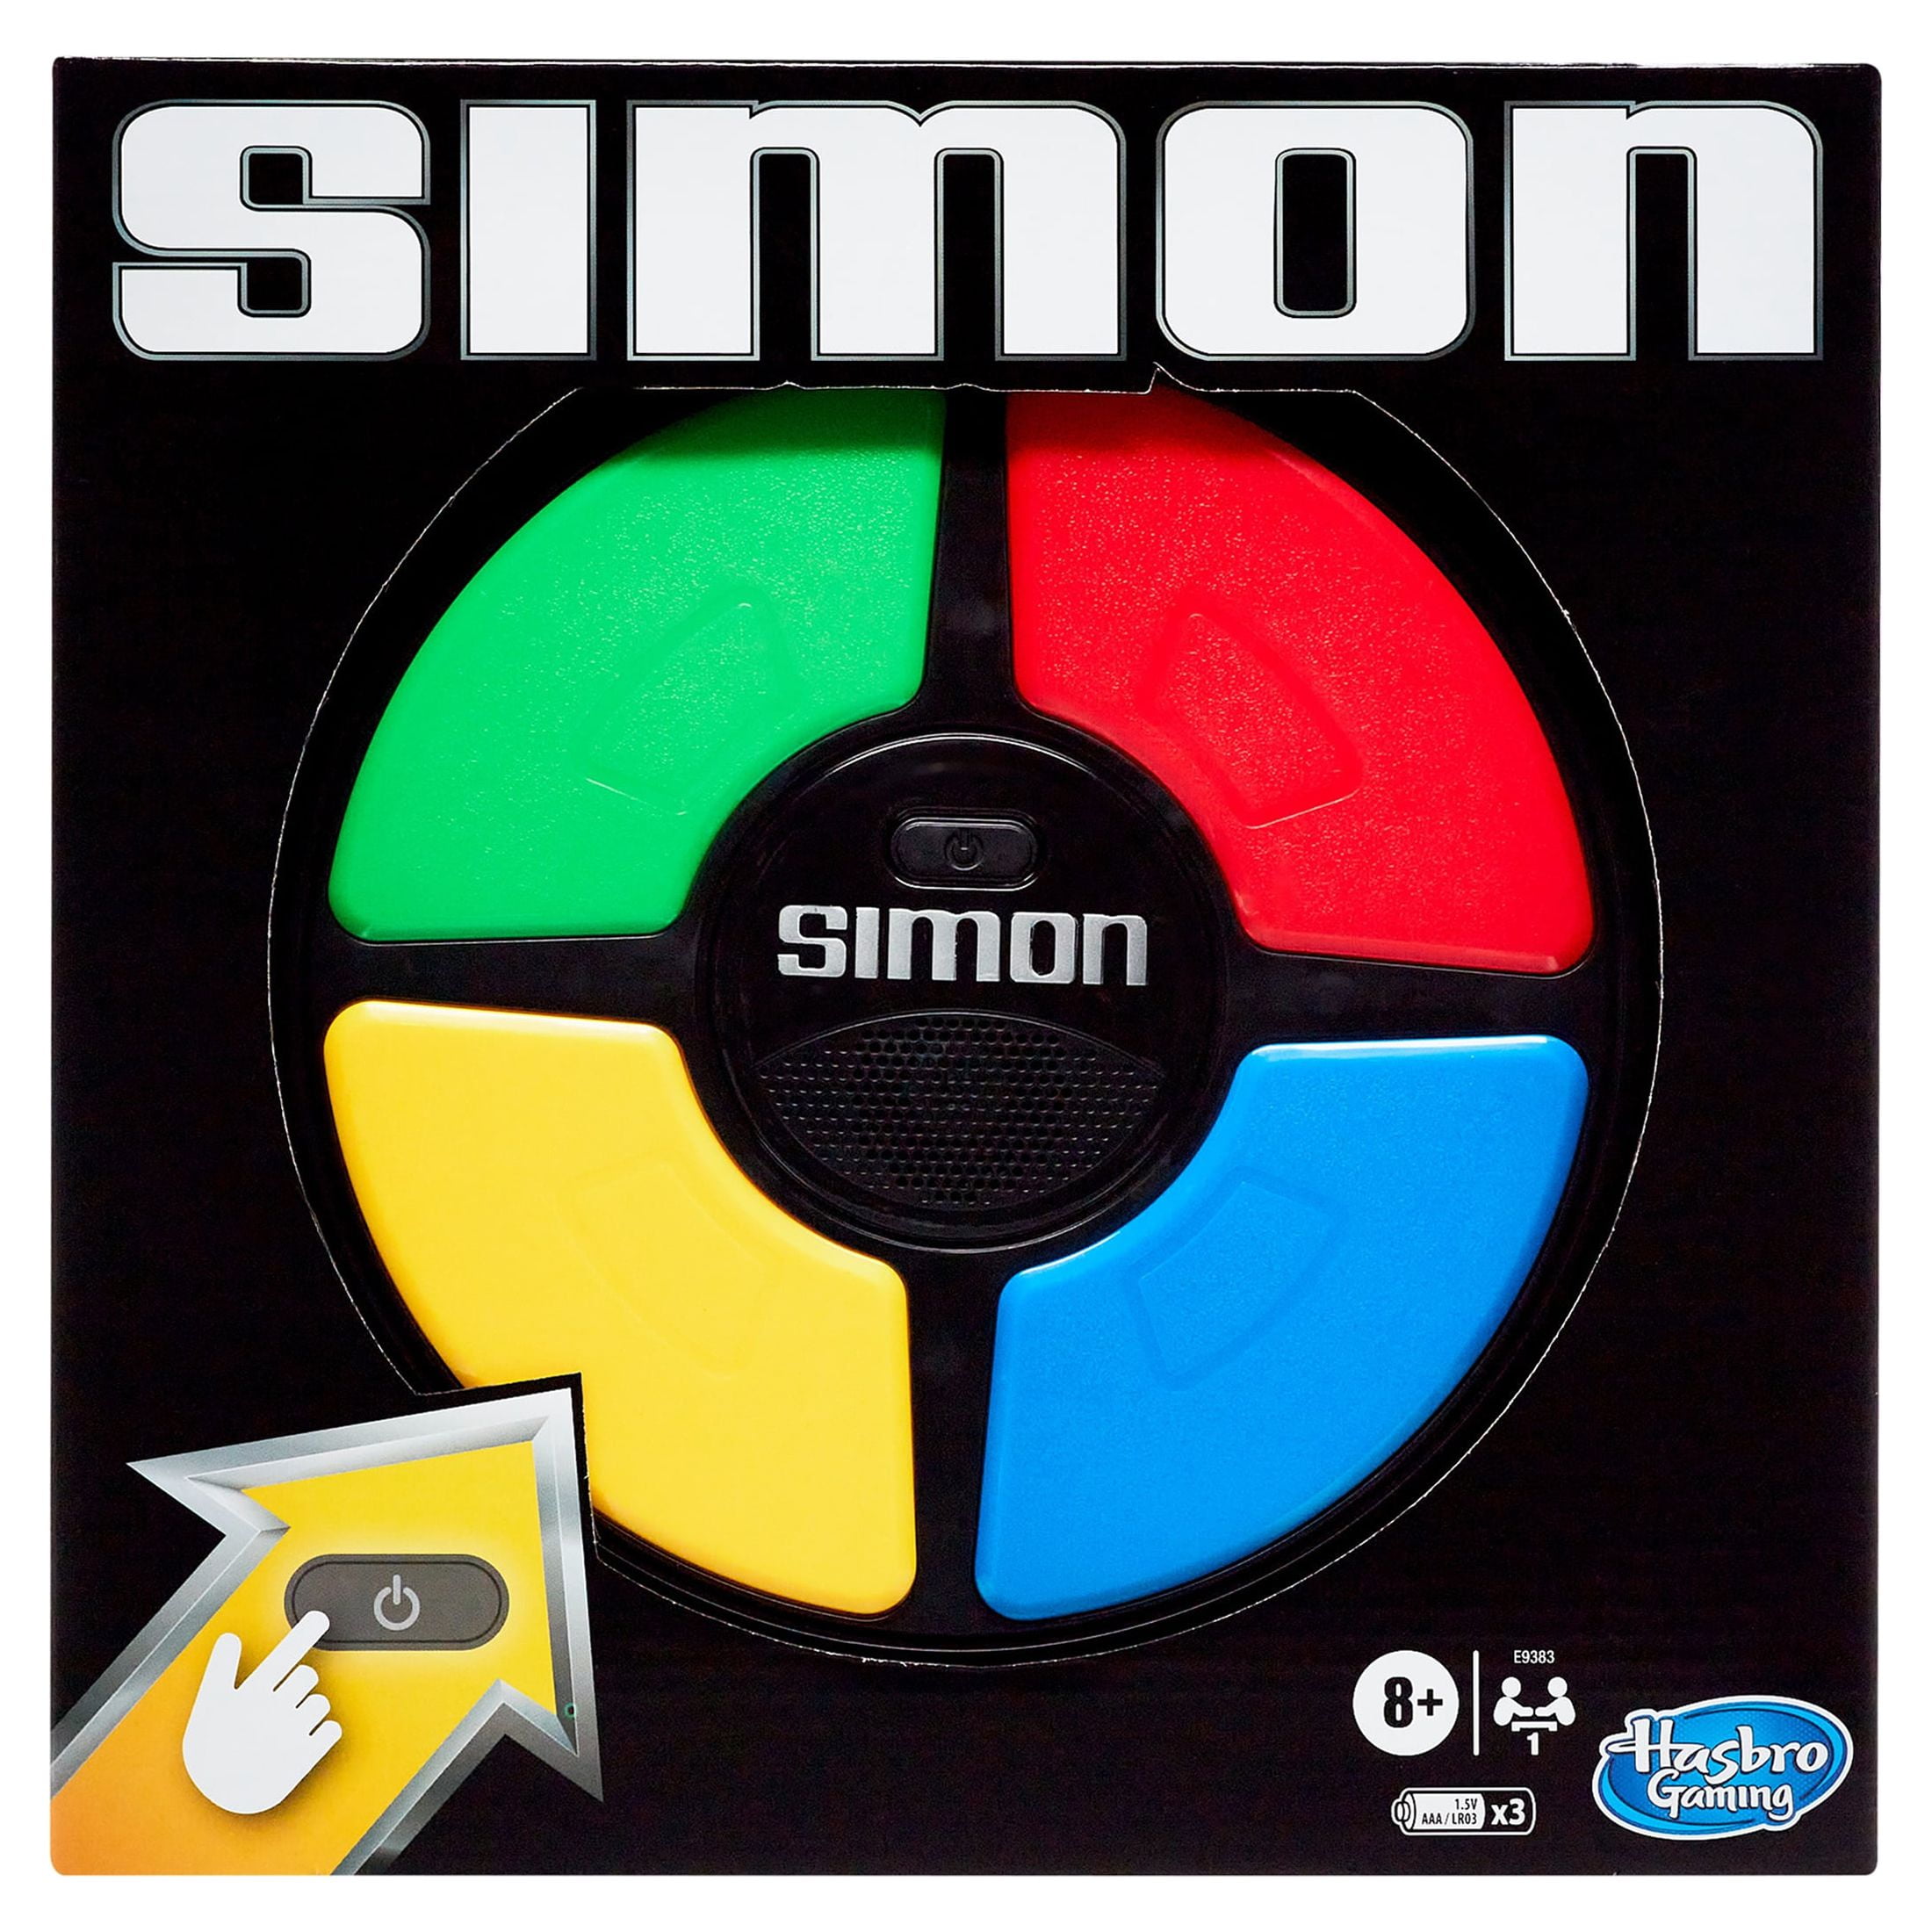 Electronic Memory Game Interesting Simon Says Electronic Game with Music  Light